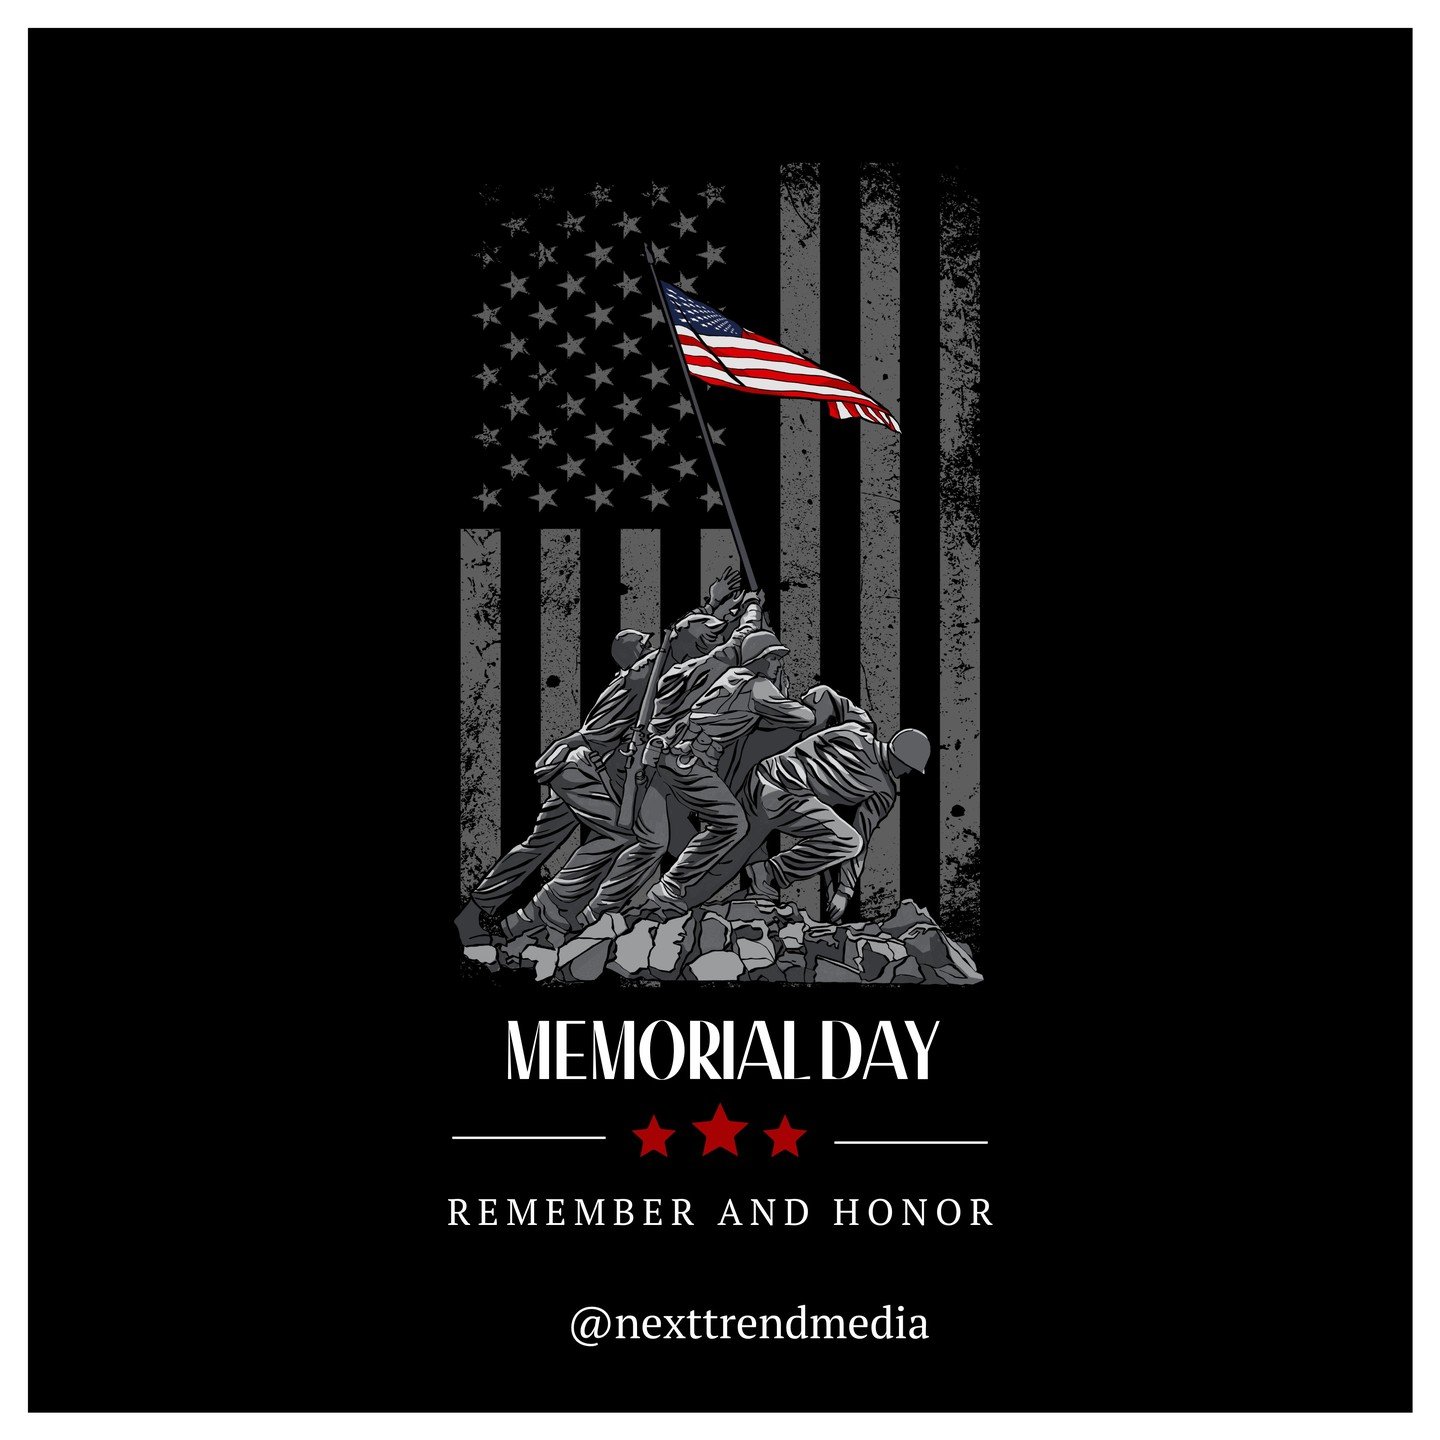 Remembering and honoring the brave souls who gave everything for our freedom. #MemorialDay #memorialdayWeekend #Honor #Remember